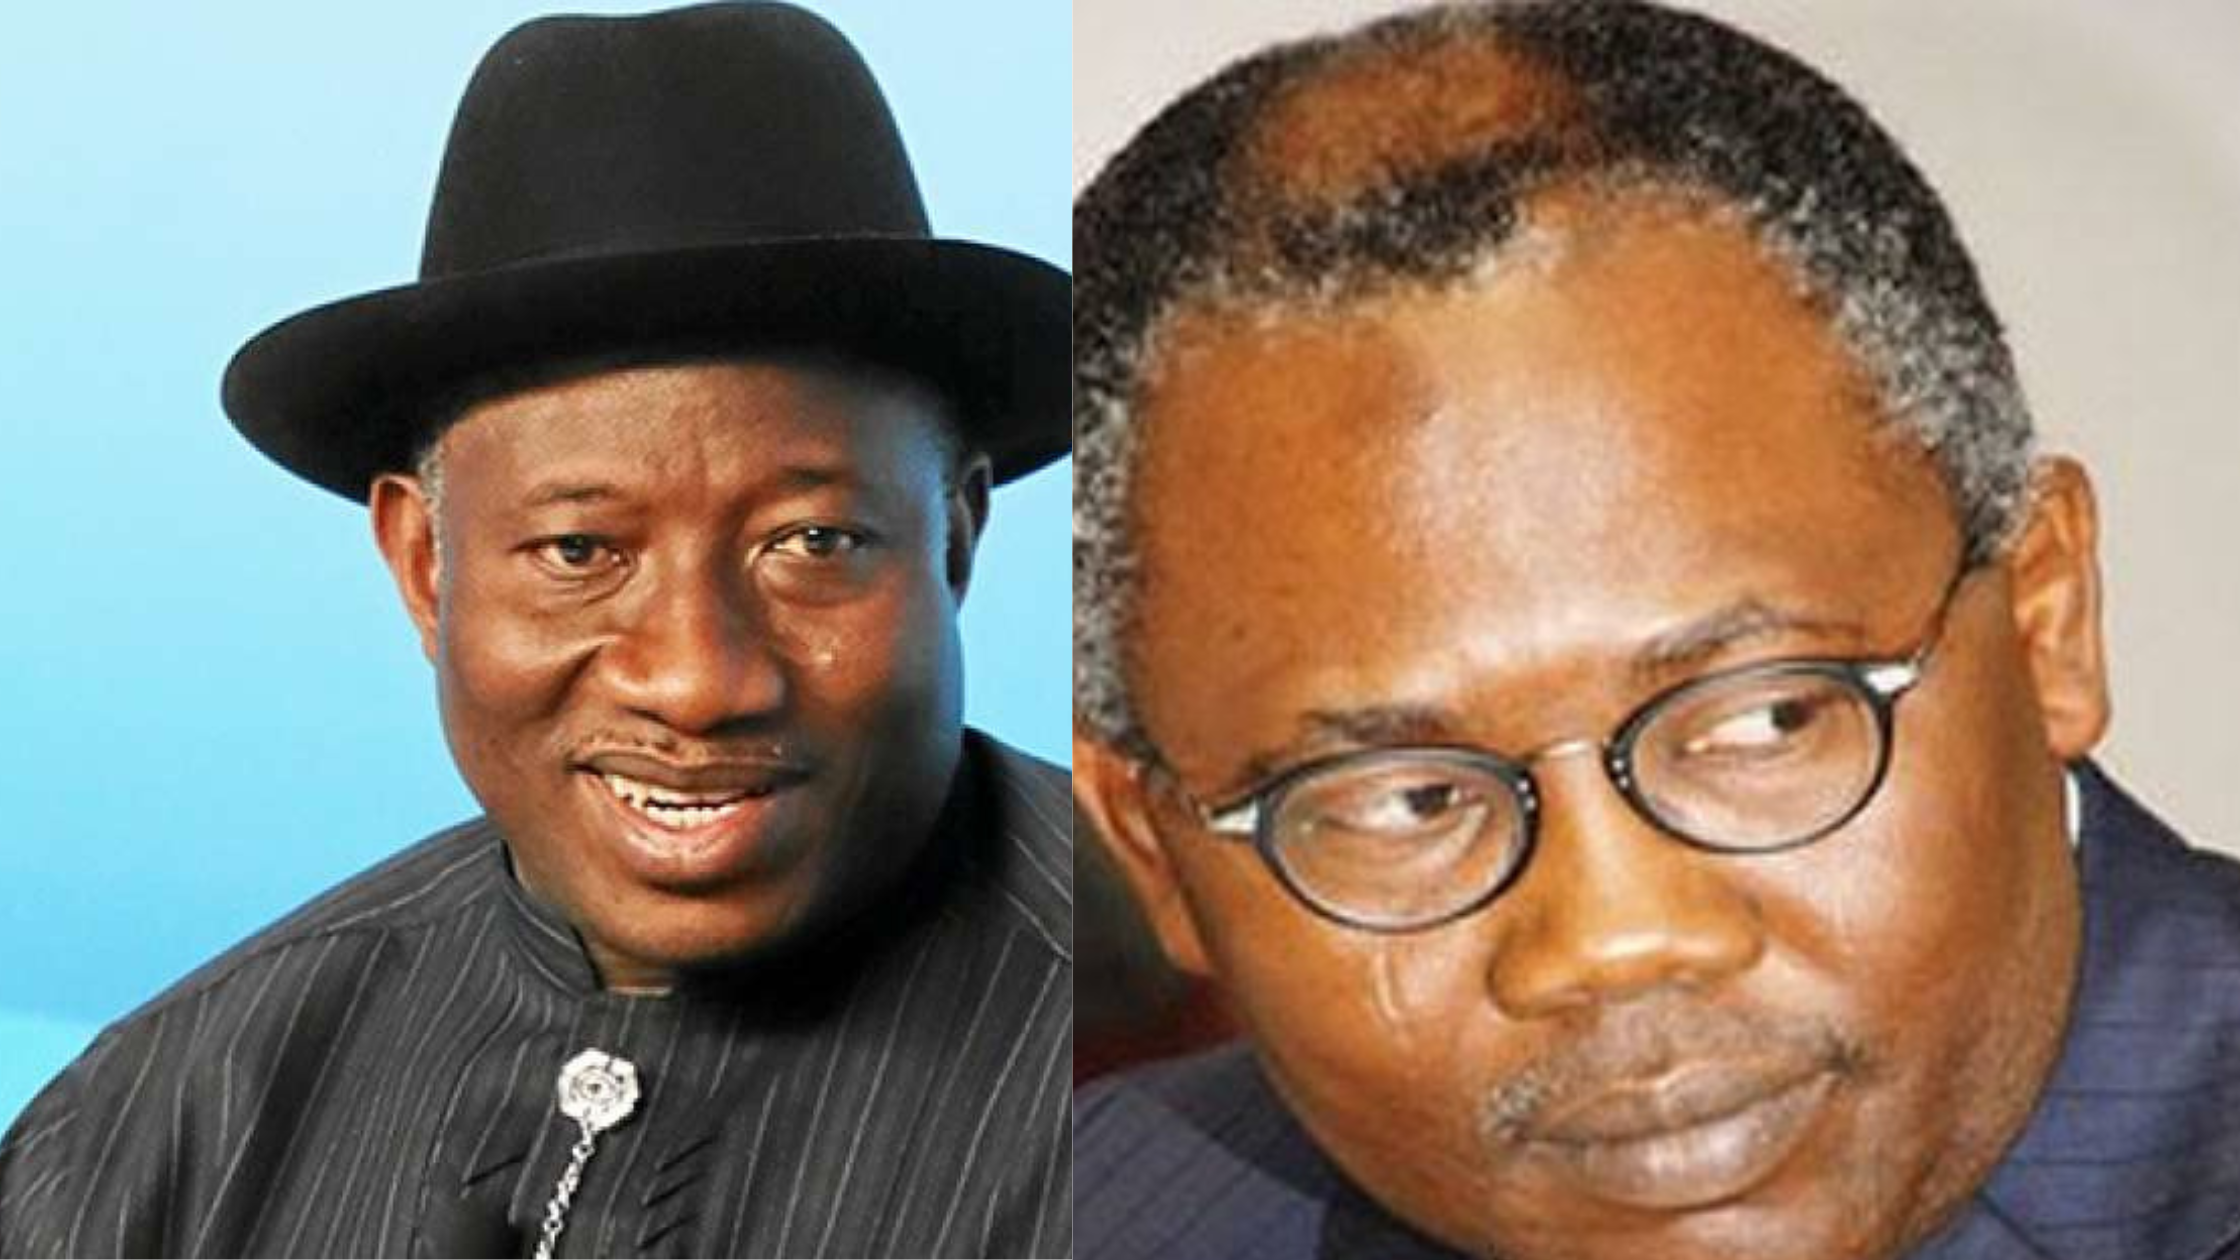 [GIST] How I Was Threatened By Anti-graft Agency, EFCC Official To Implicate Ex-Nigerian President Jonathan And Adoke, Defence Witness Tells Court